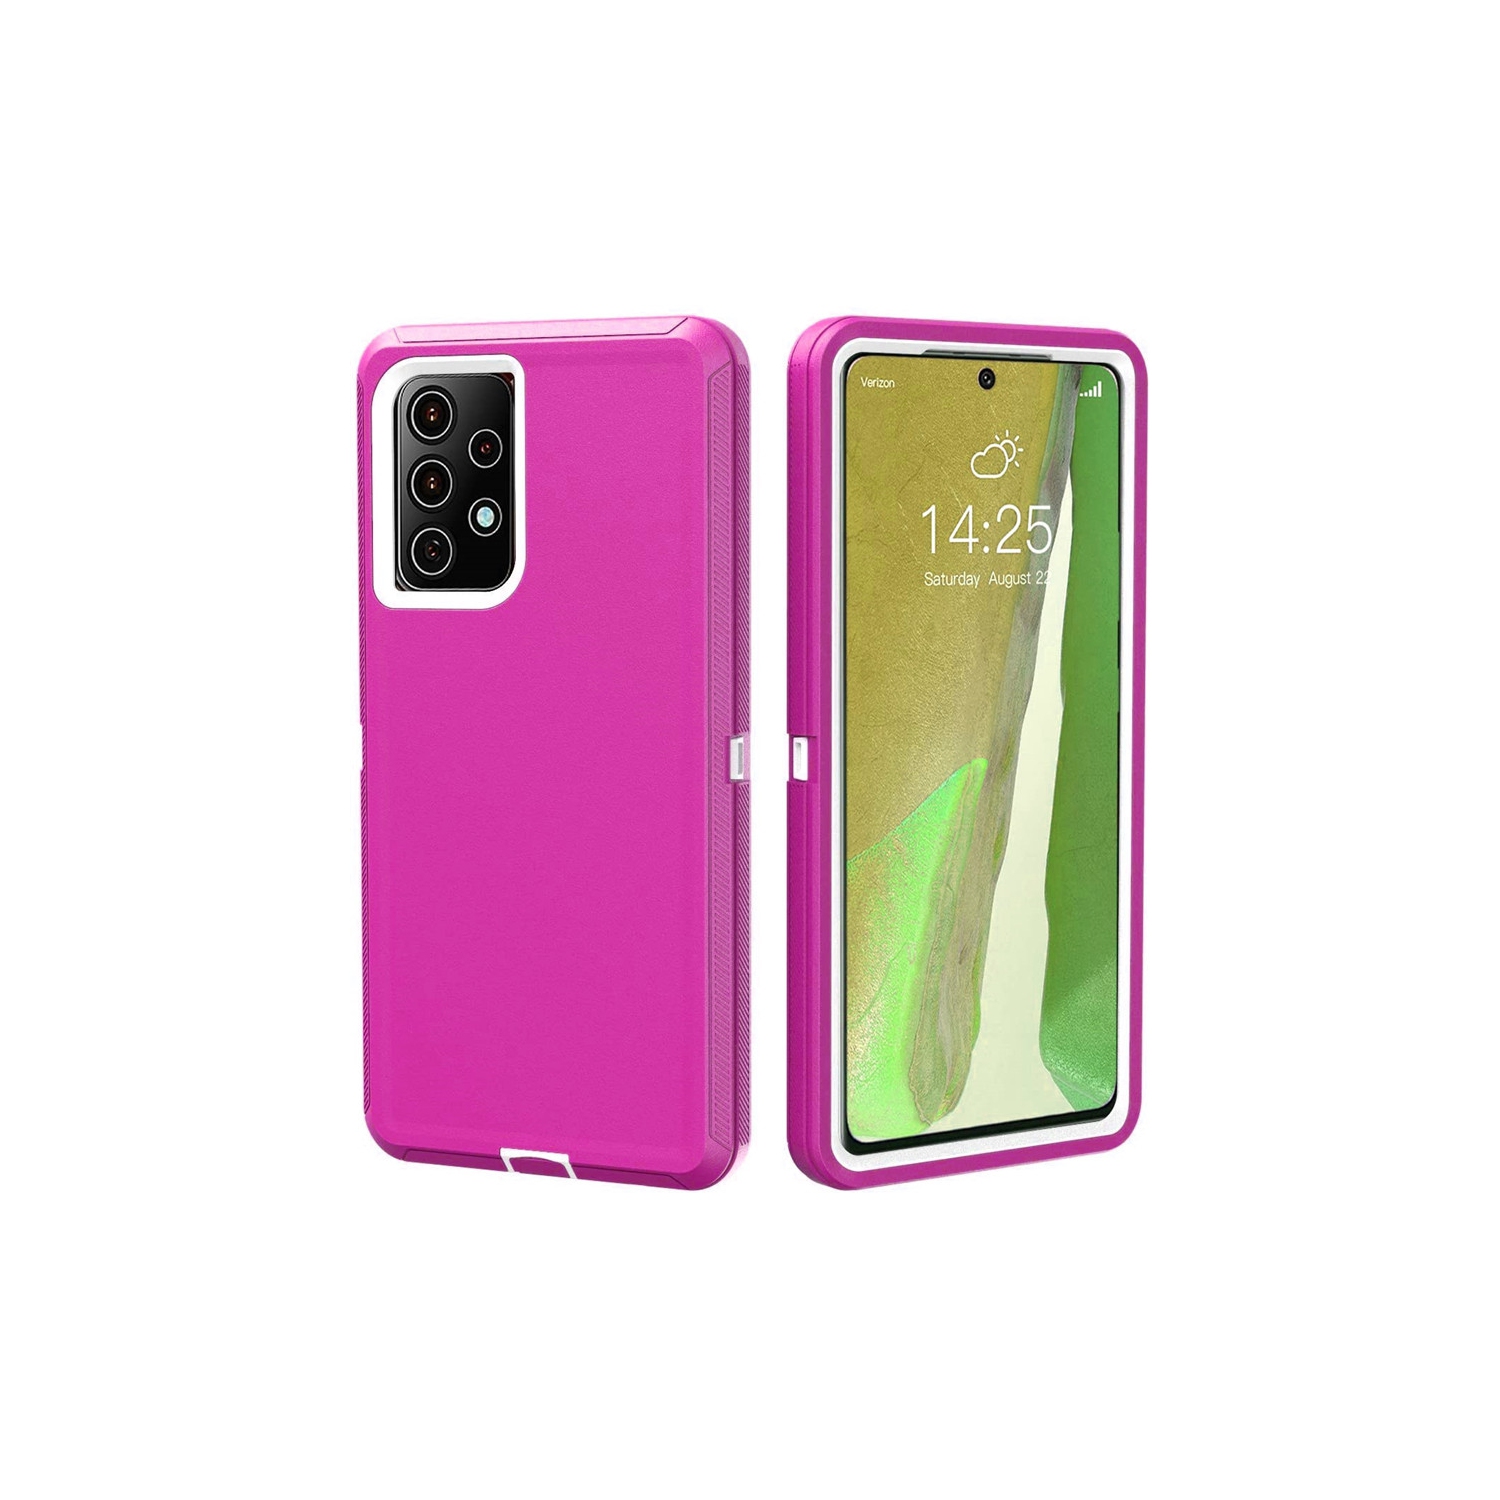 【CSmart】 Anti-Drop Triple 3 Layers Shockproof Heavy Duty Defender Hard Case for Samsung Galaxy A52 5G, Hot Pink